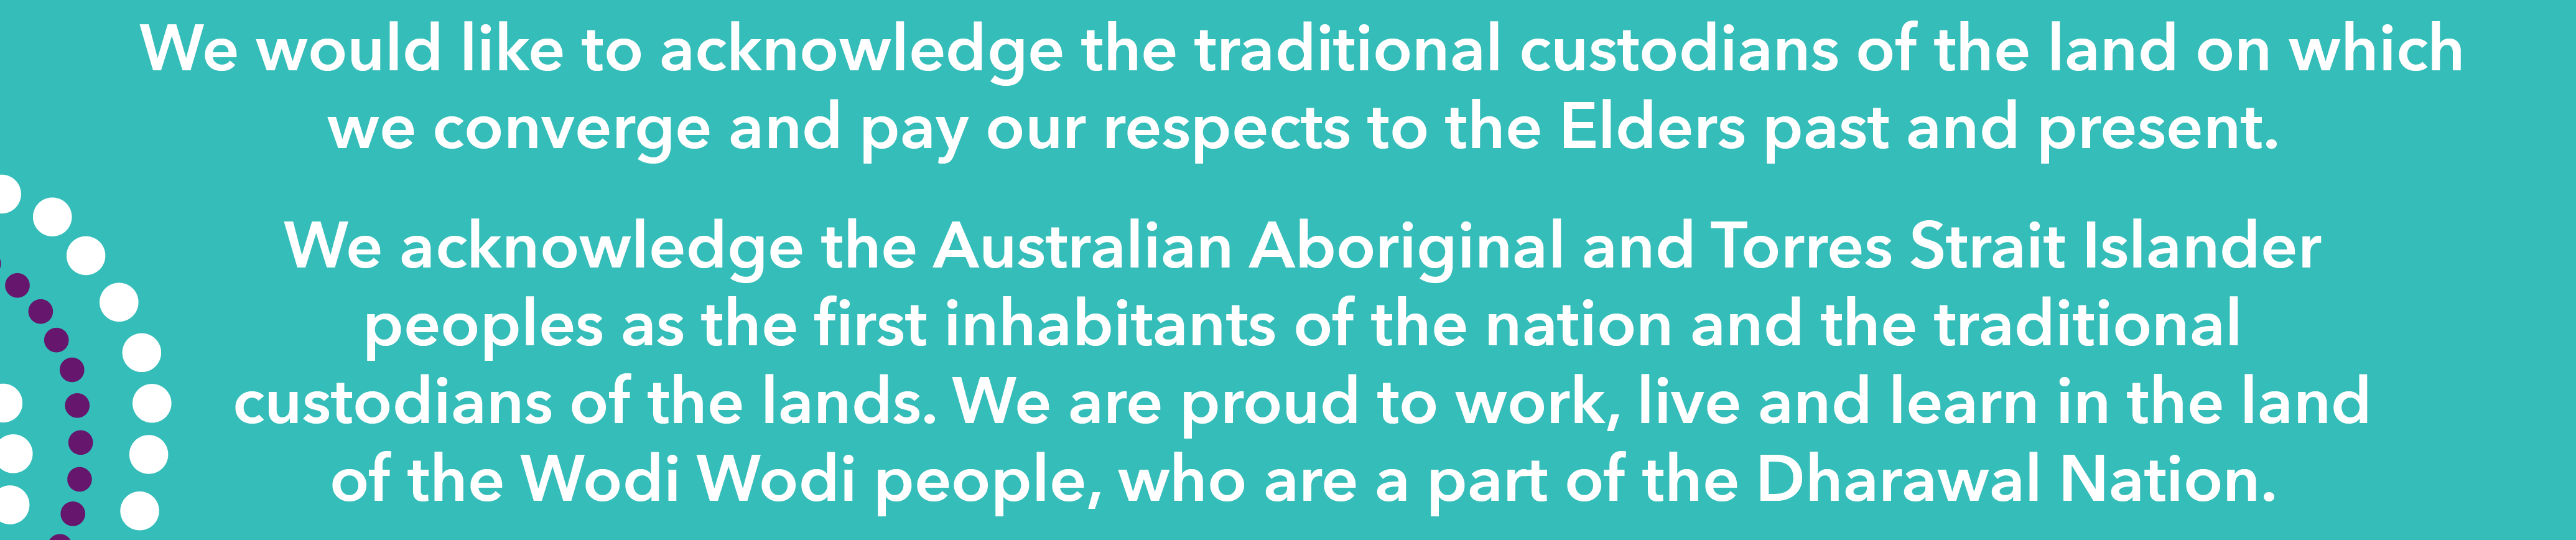 We would like to acknowledge the traditional custodians of the land on which we converge and pay our respects to the Elders past and present.